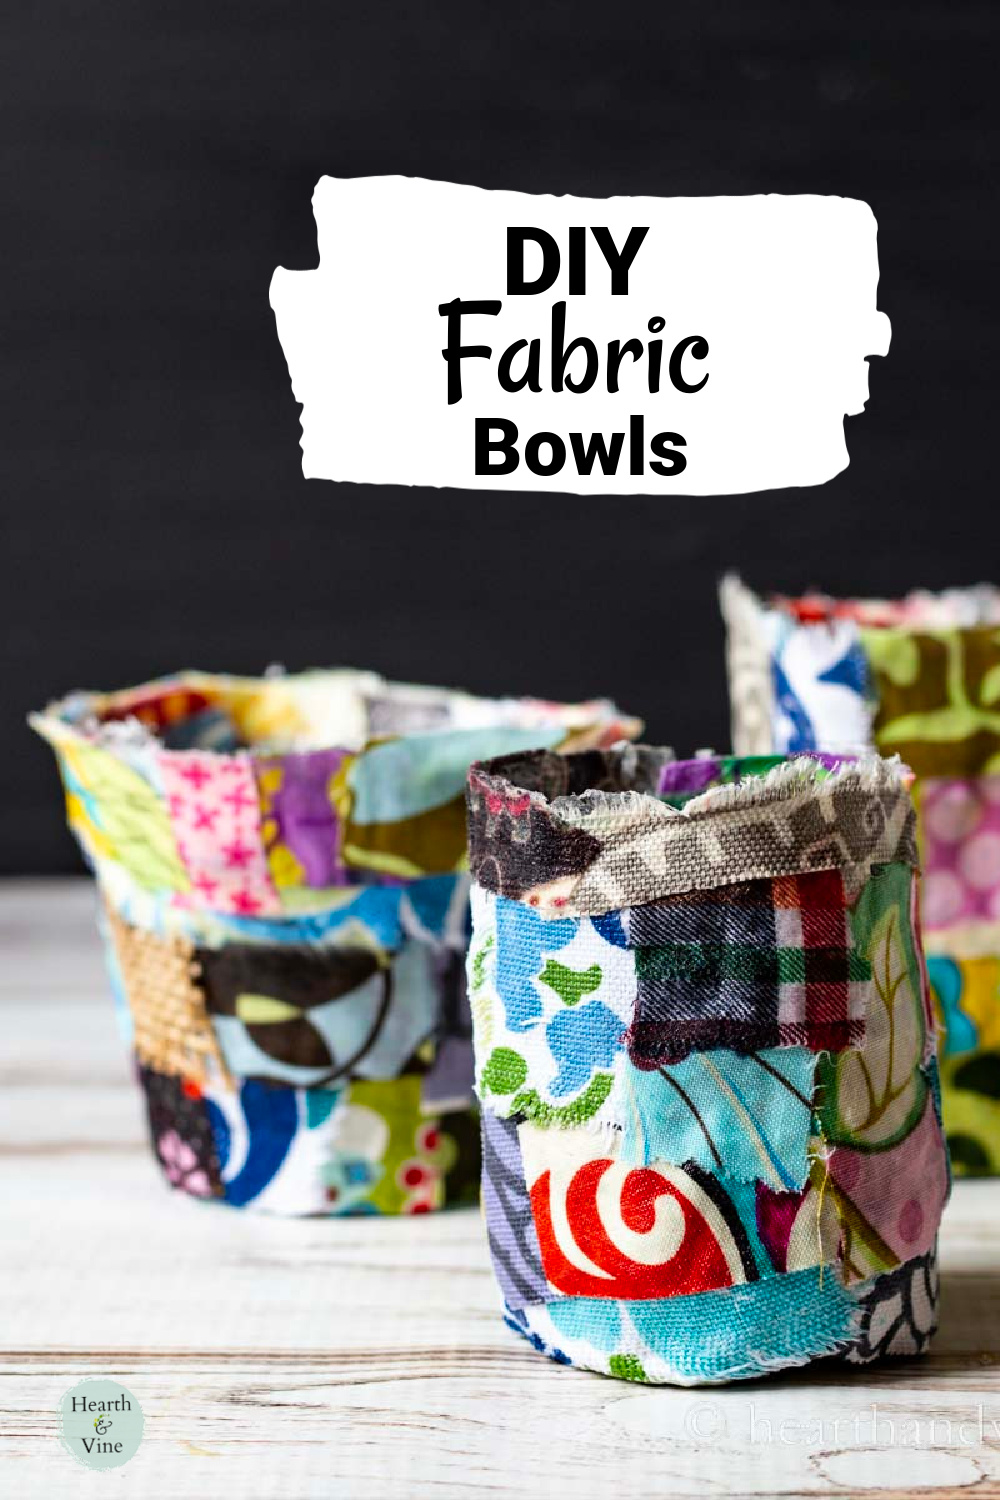 Multi-colored fabric scraps turned into pots or bowls.